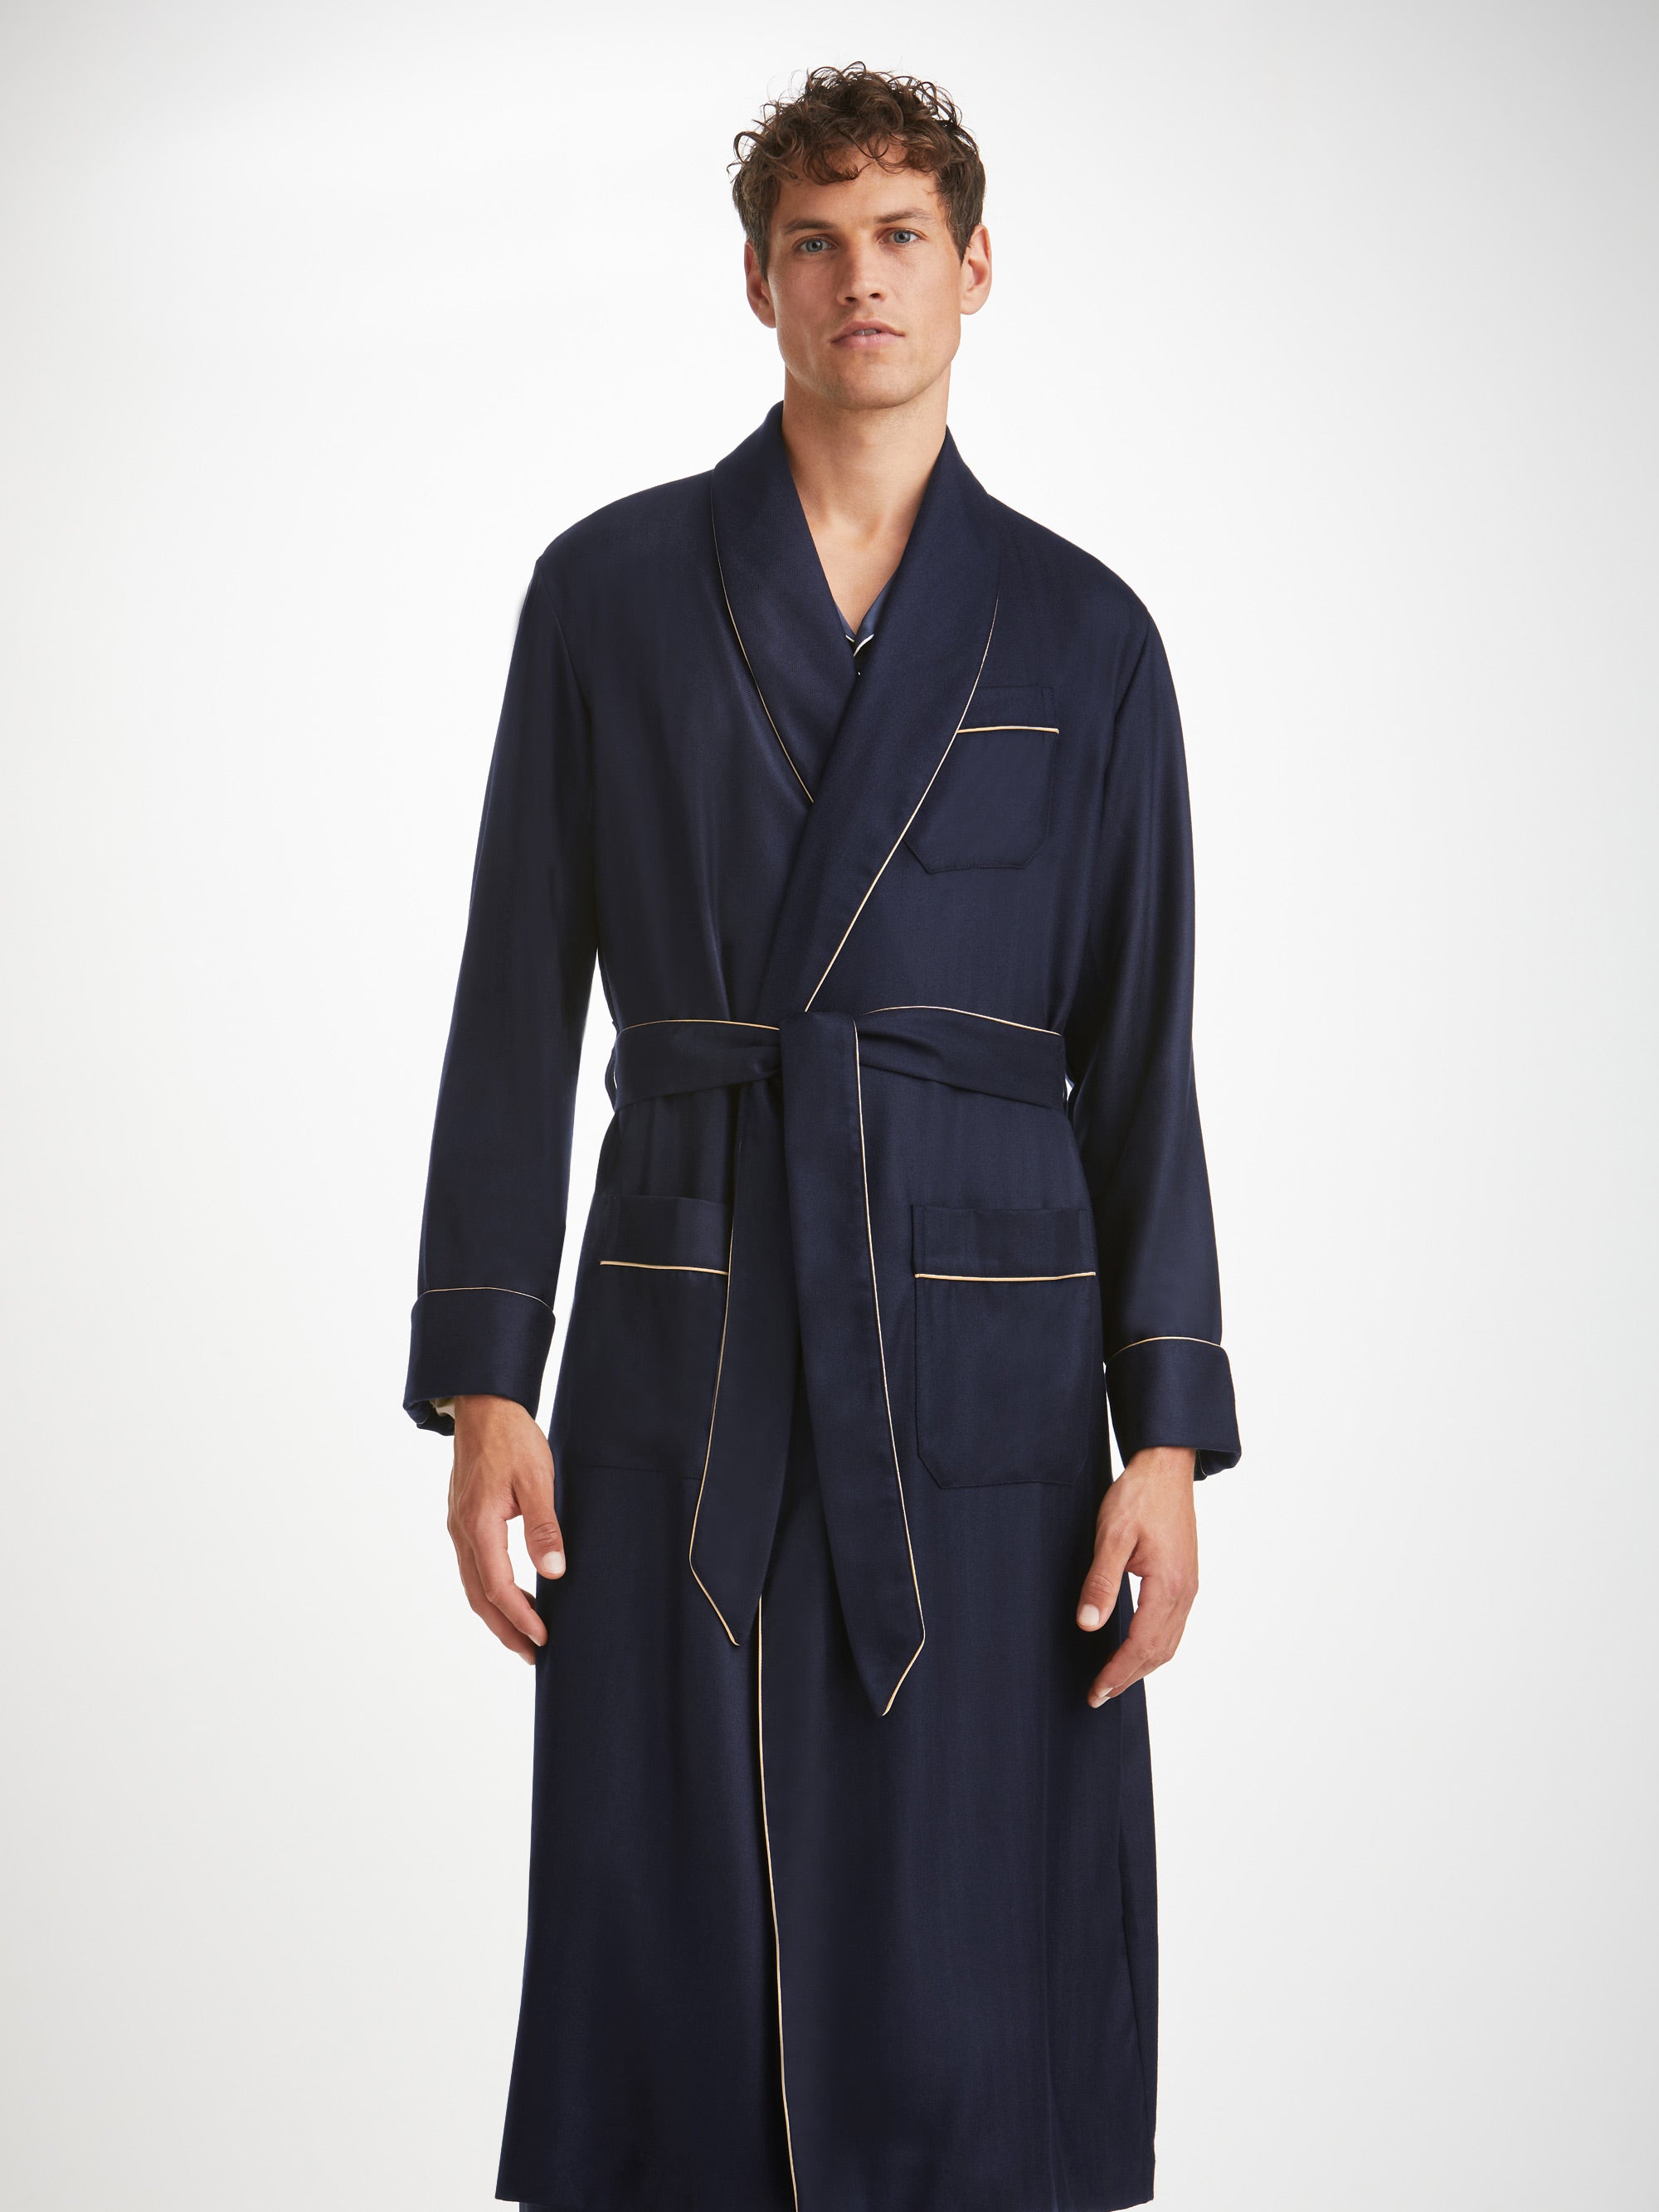 Men's Dressing Gown in Wool and Cashmere model Classic Shawl art. Londra  (as1, alpha, 3x_l, regular, regular, Bordeaux) at Amazon Men's Clothing  store